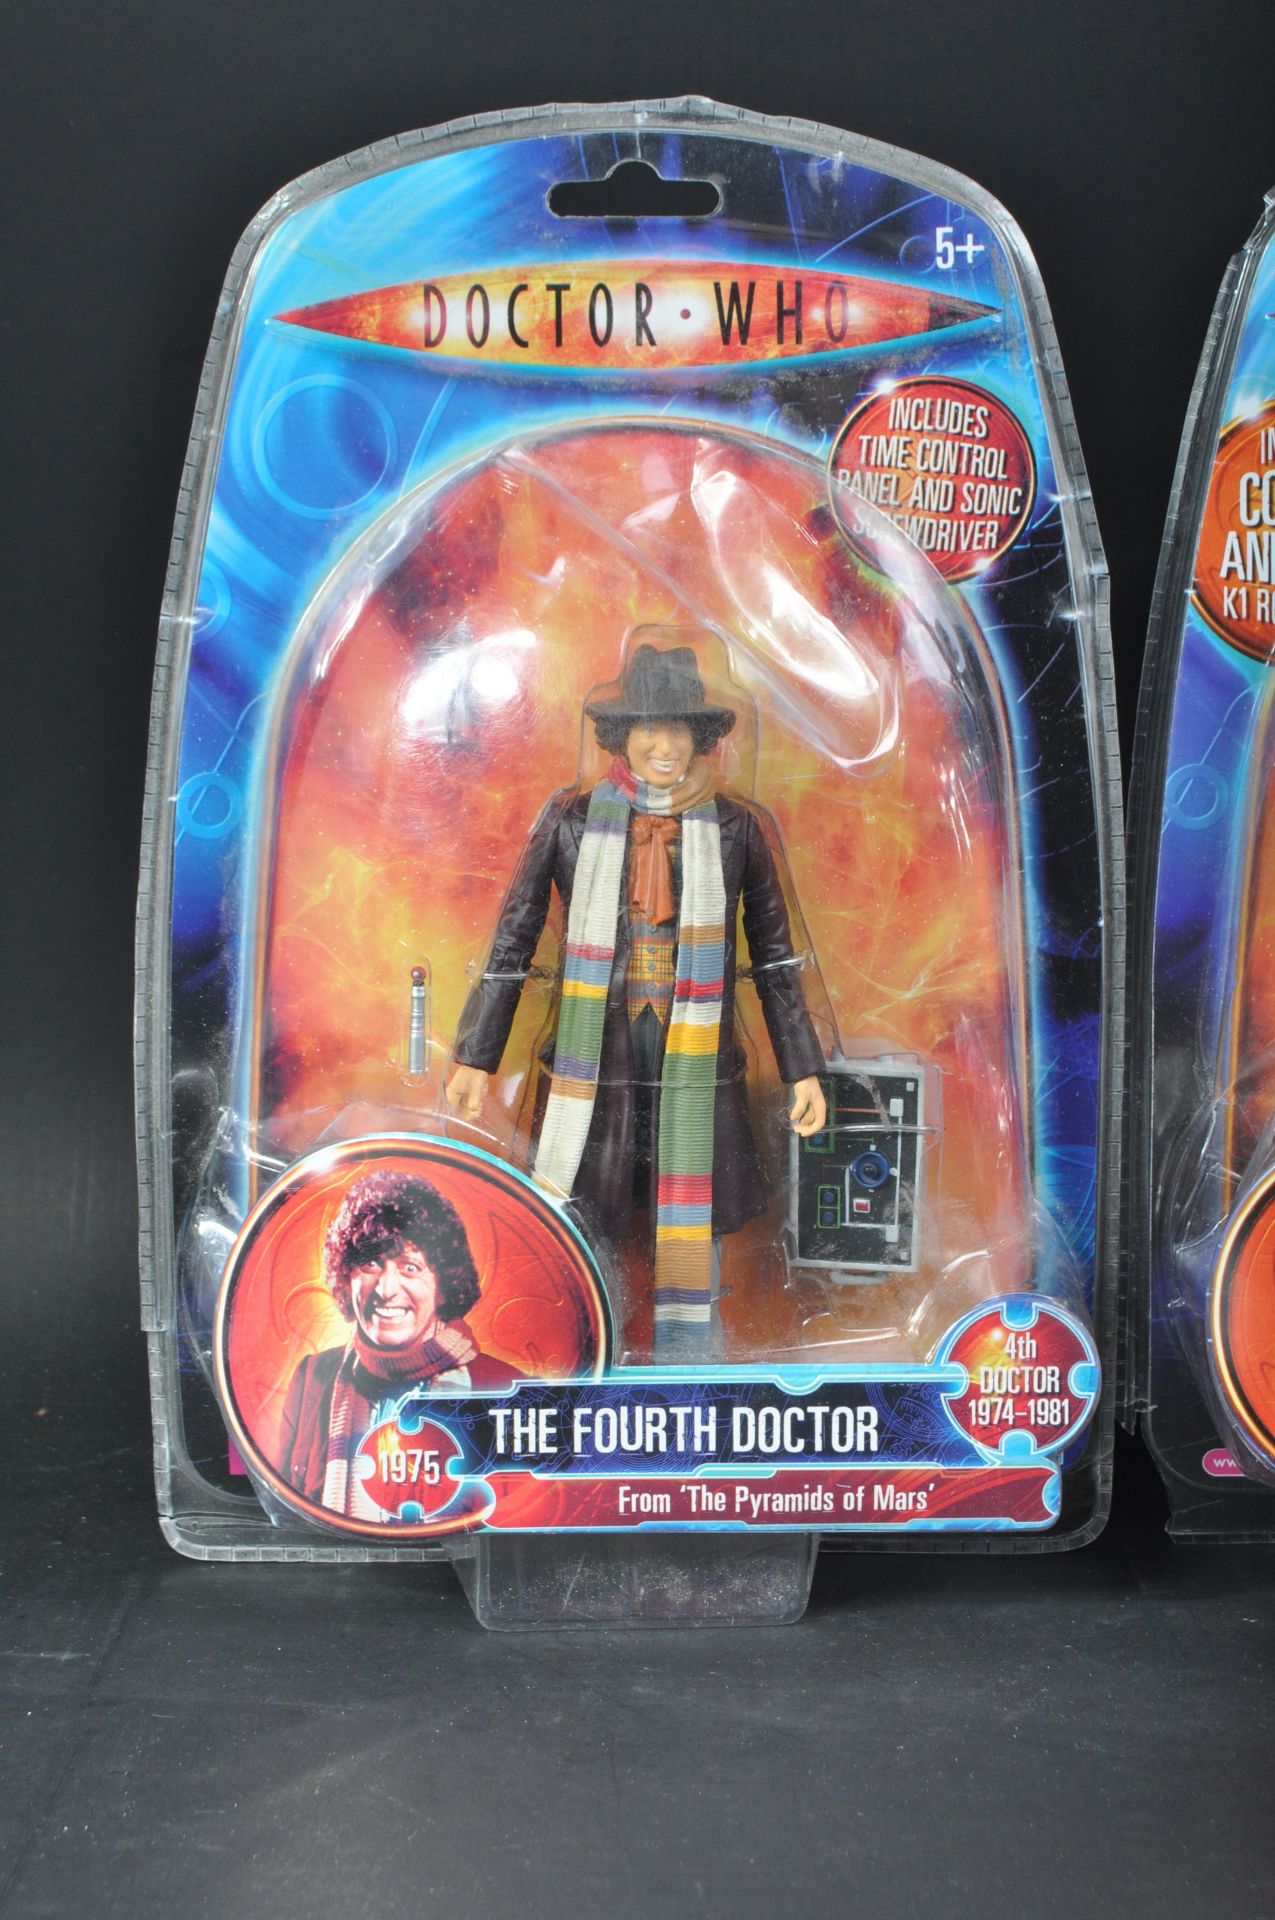 DOCTOR WHO - CHARACTER OPTIONS - FOURTH DOCTOR ACTION FIGURES - Image 2 of 5